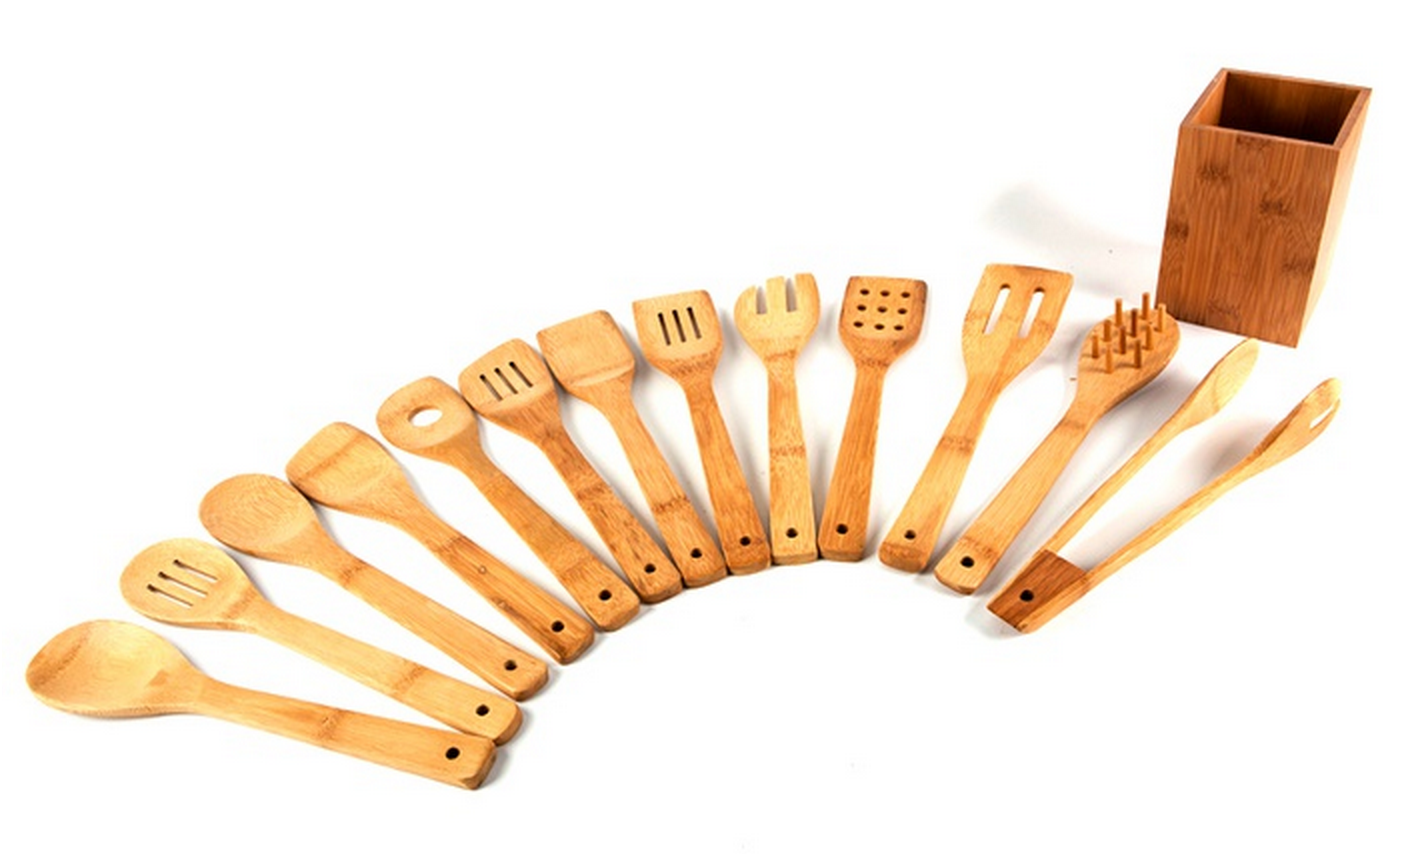 https://9to5toys.com/wp-content/uploads/sites/5/2015/02/core-bamboo-eco-friendly-14-piece-utensil-set-sale-01.png